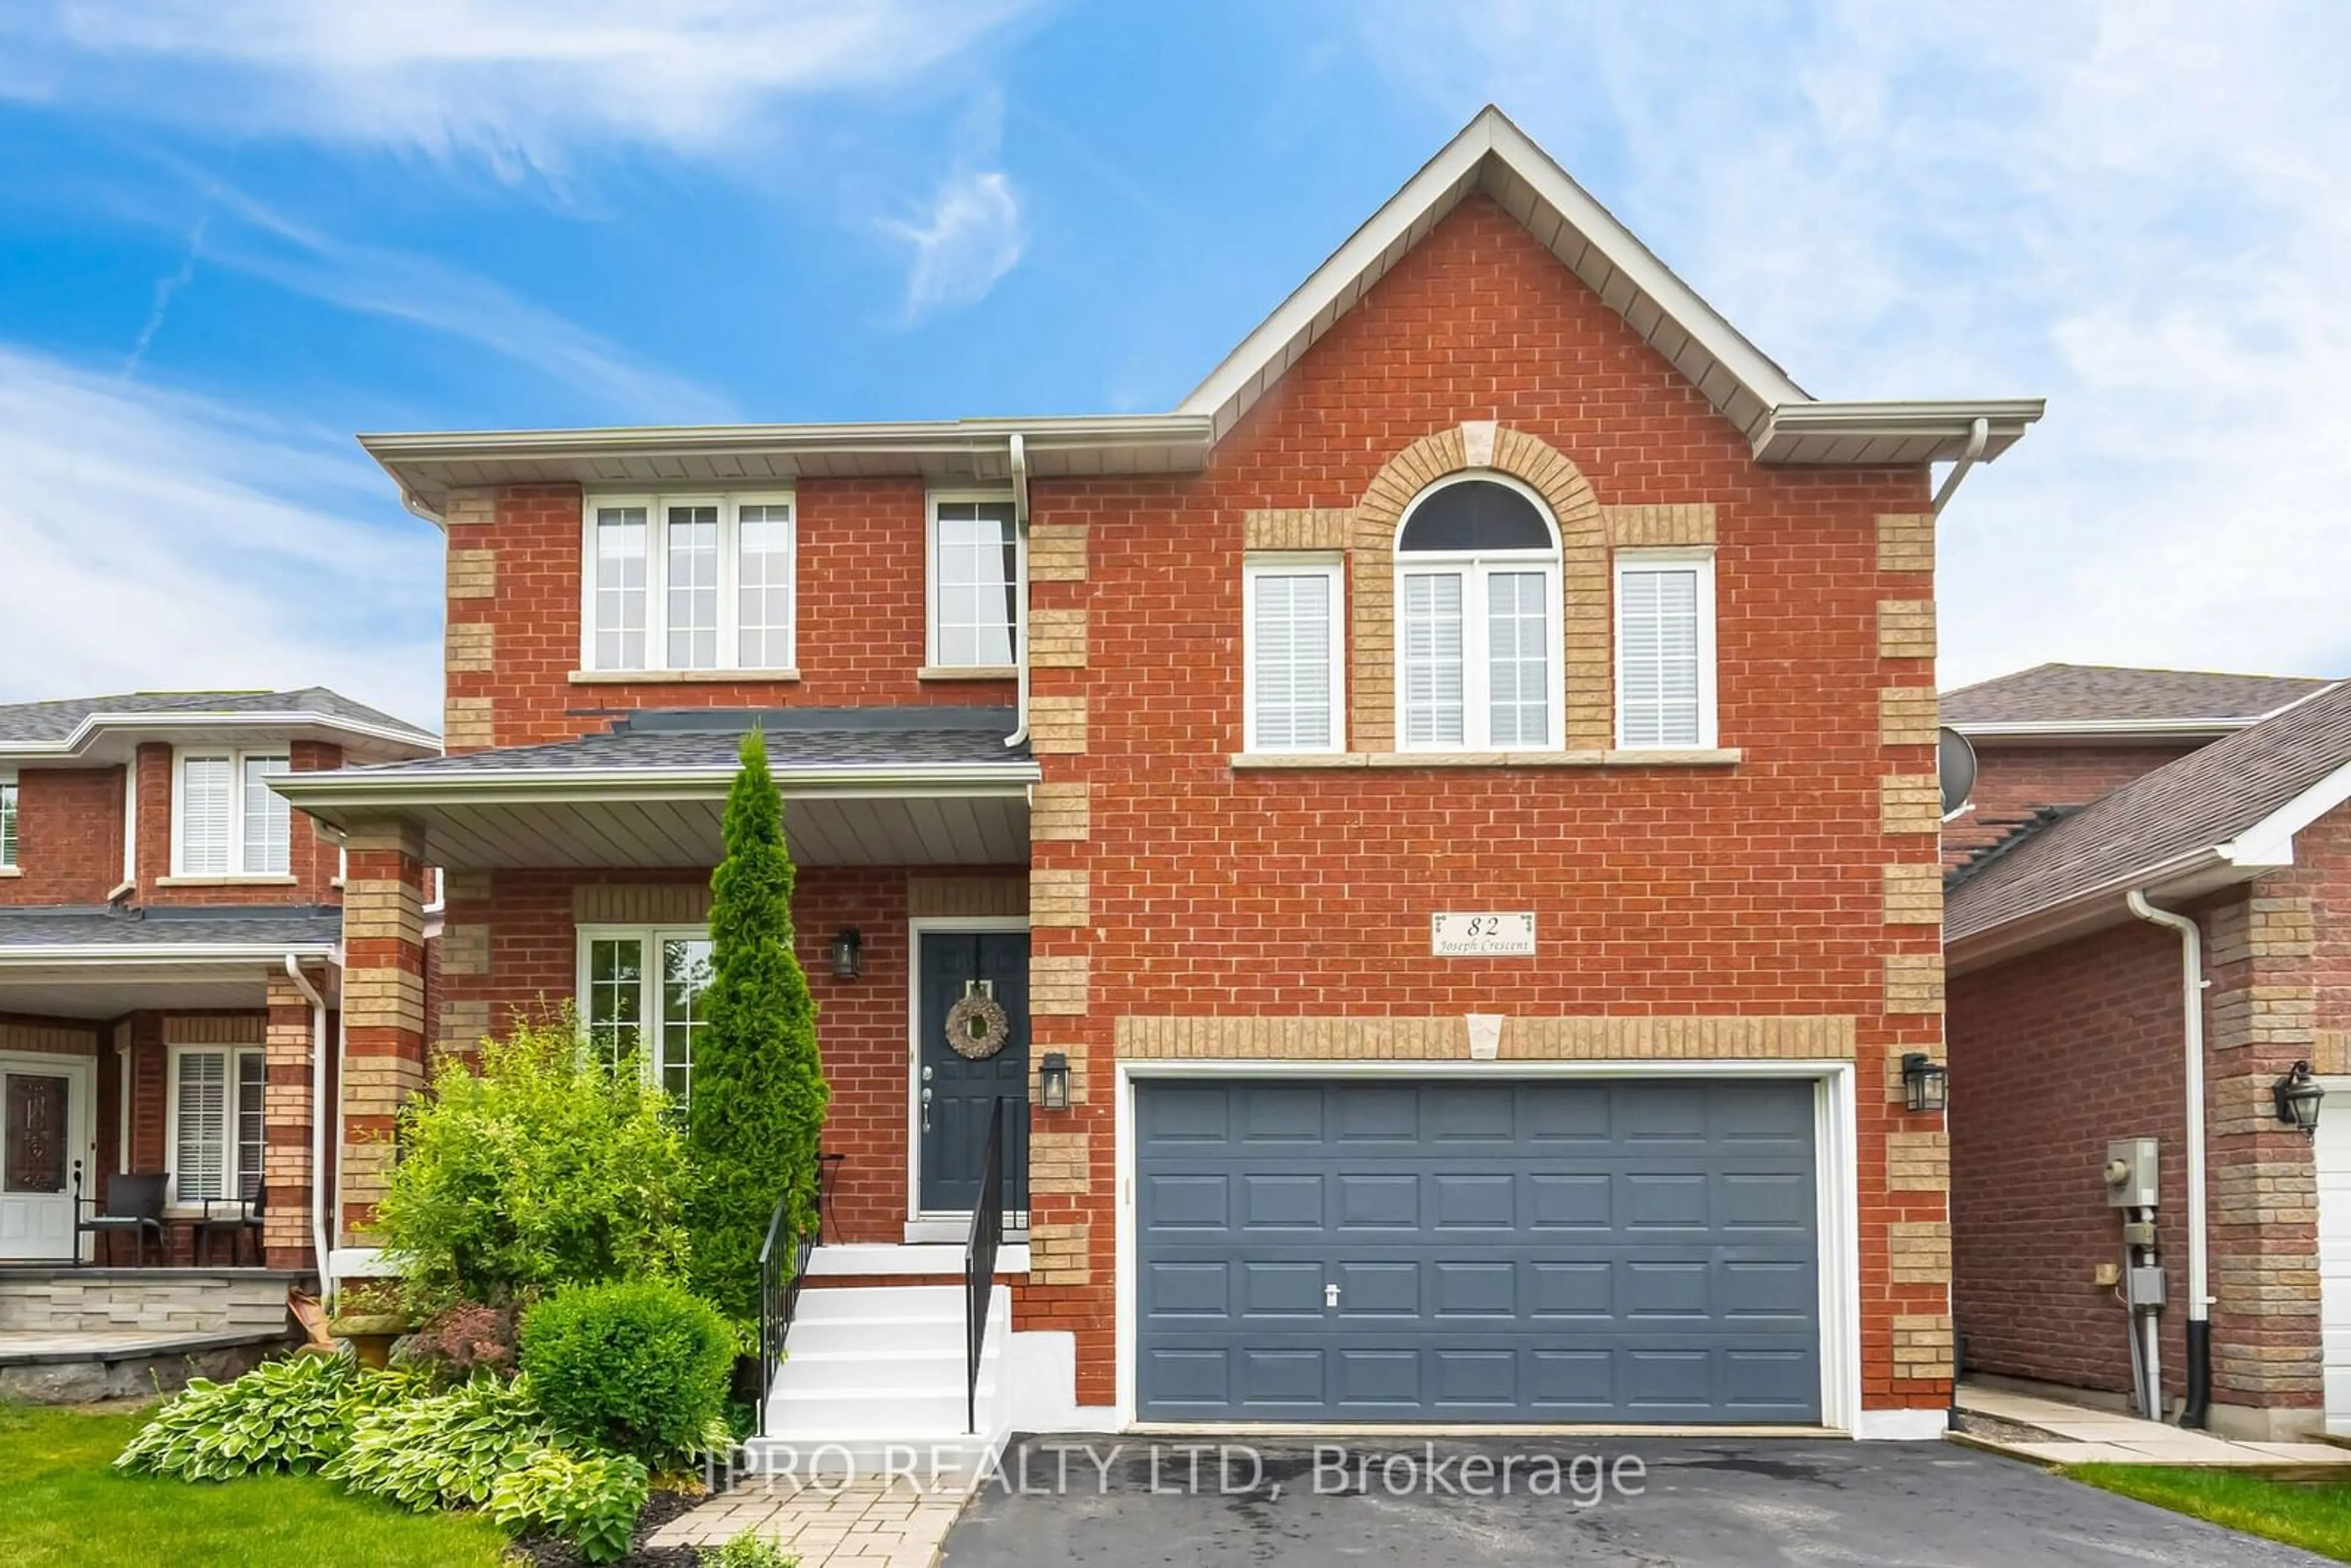 Home with brick exterior material for 82 Joseph Cres, Barrie Ontario L4N 0Y2